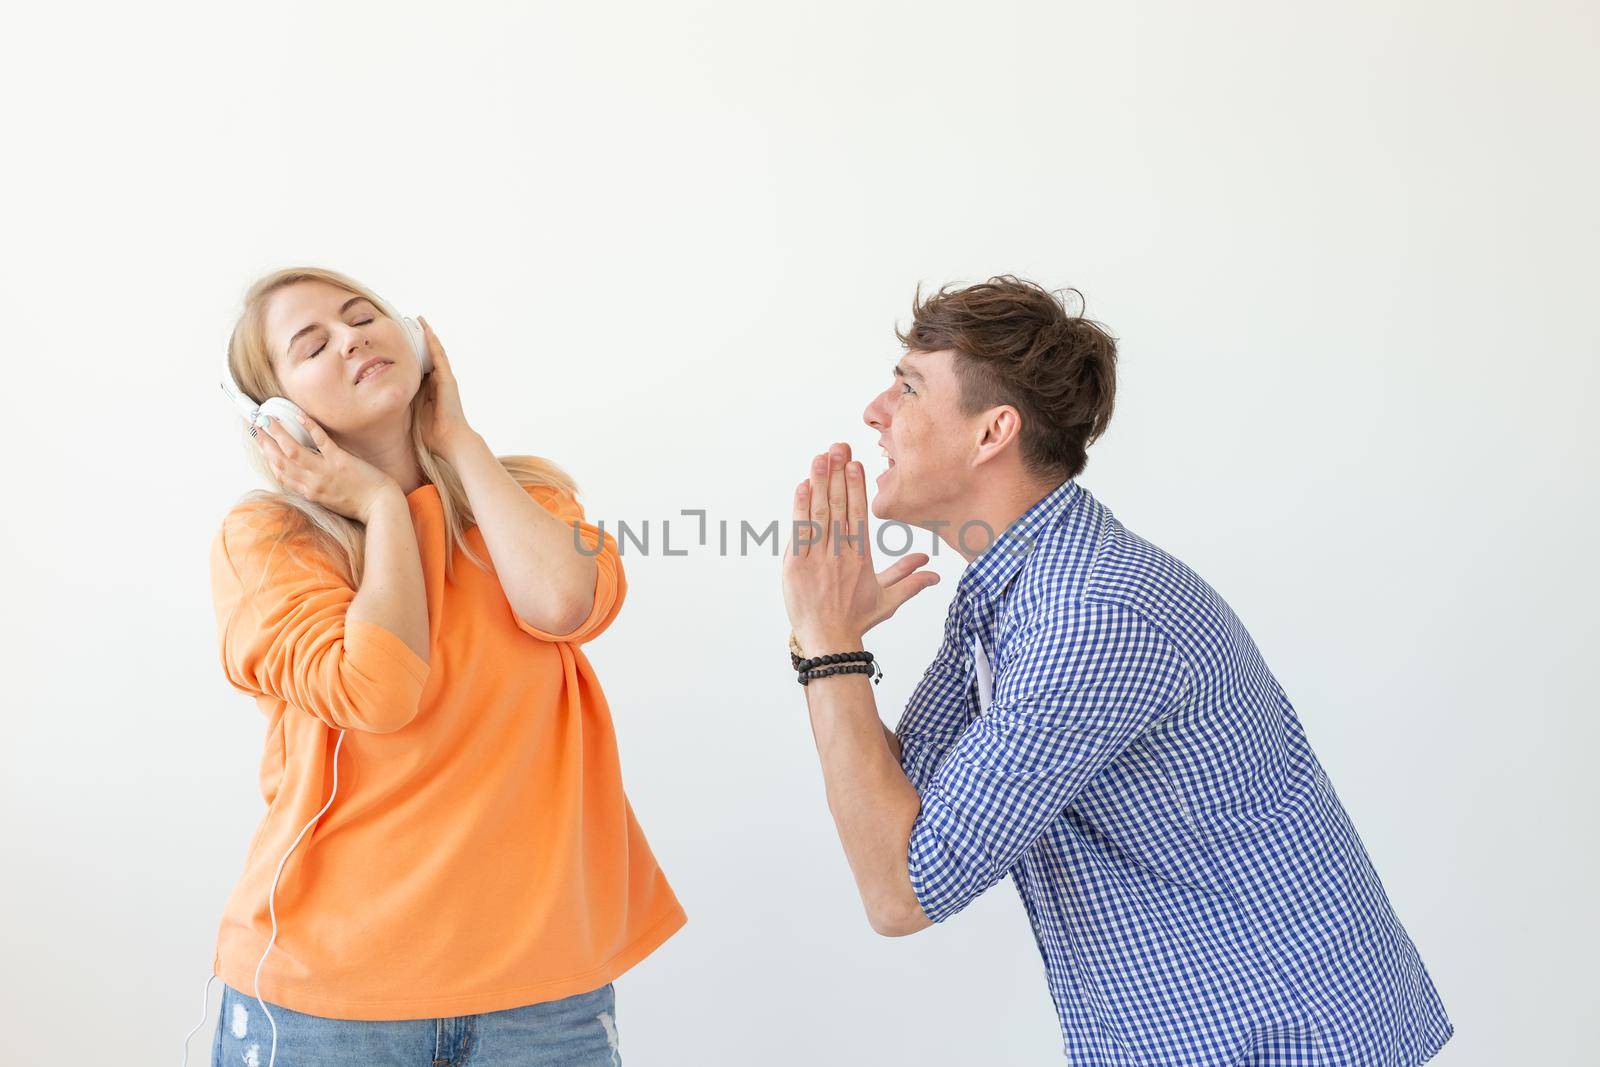 Young upset man begs his woman to listen to him but she listens to music with headphones posing on a white background. Misunderstanding and unwillingness to engage in dialogue